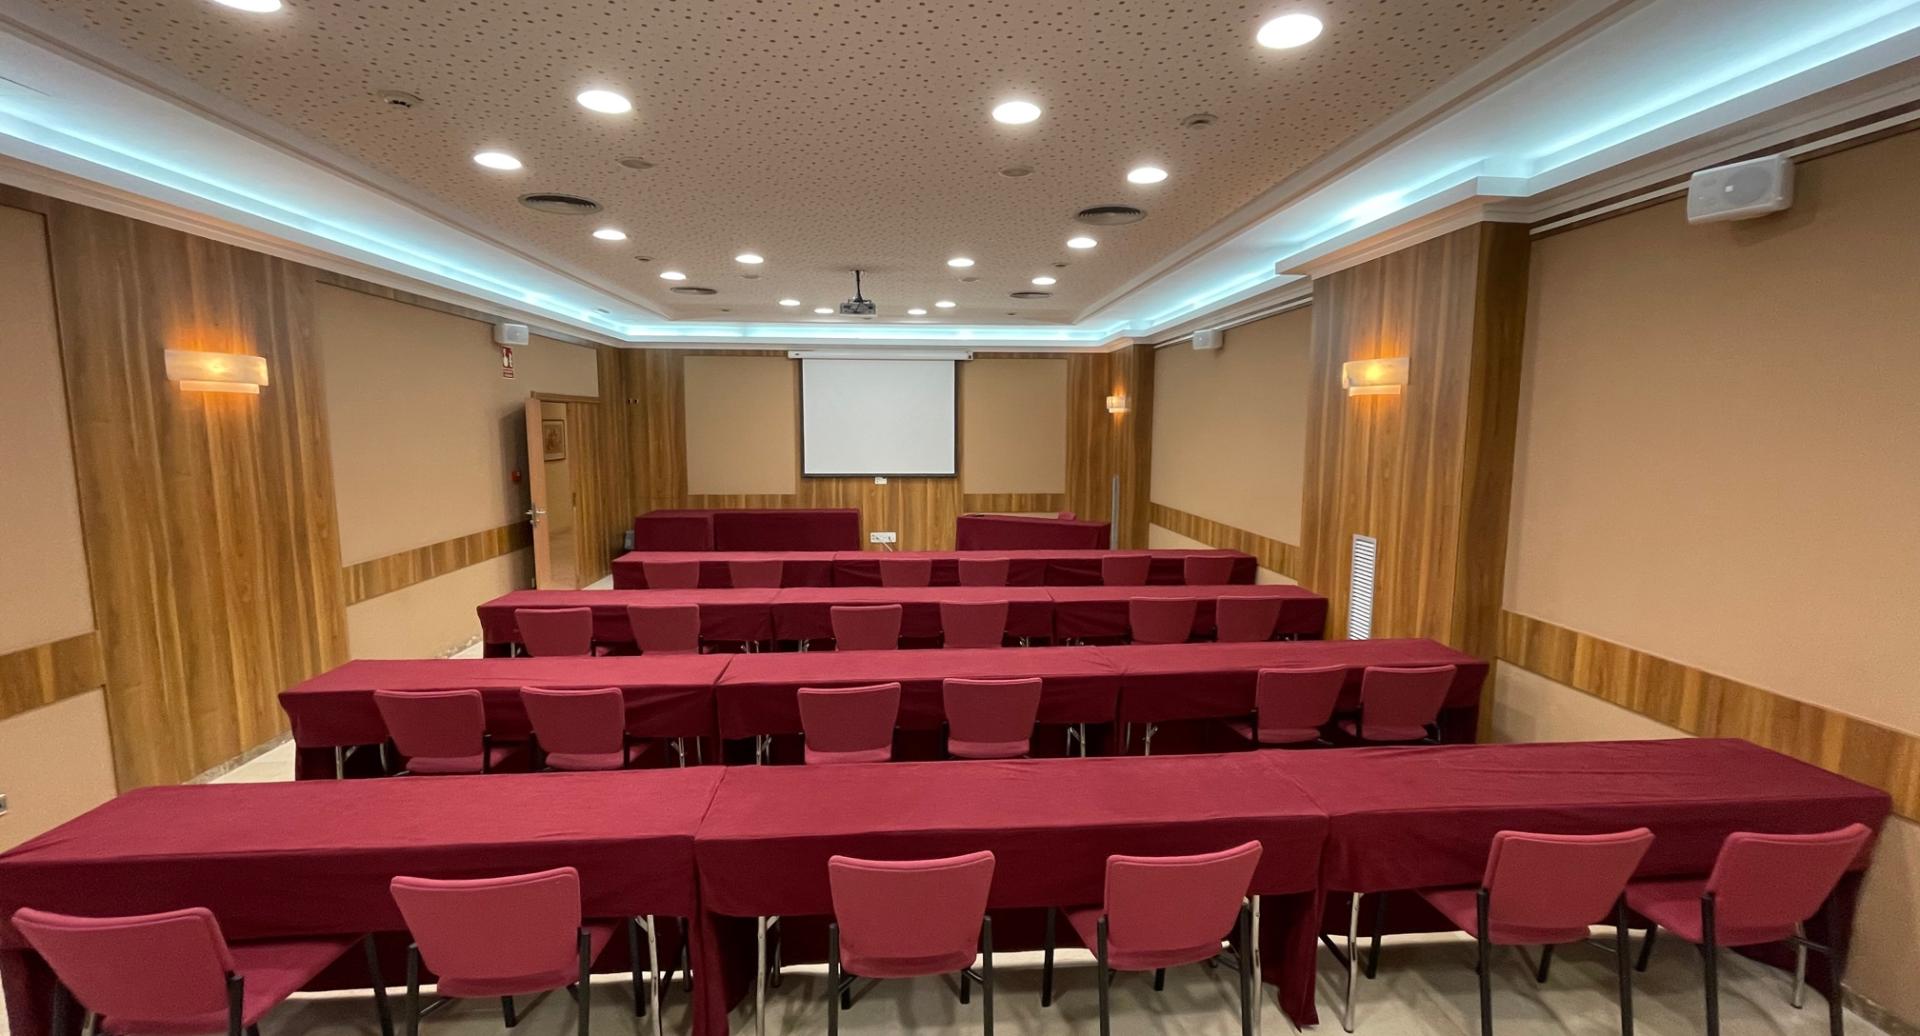 Rooms for events in Valls